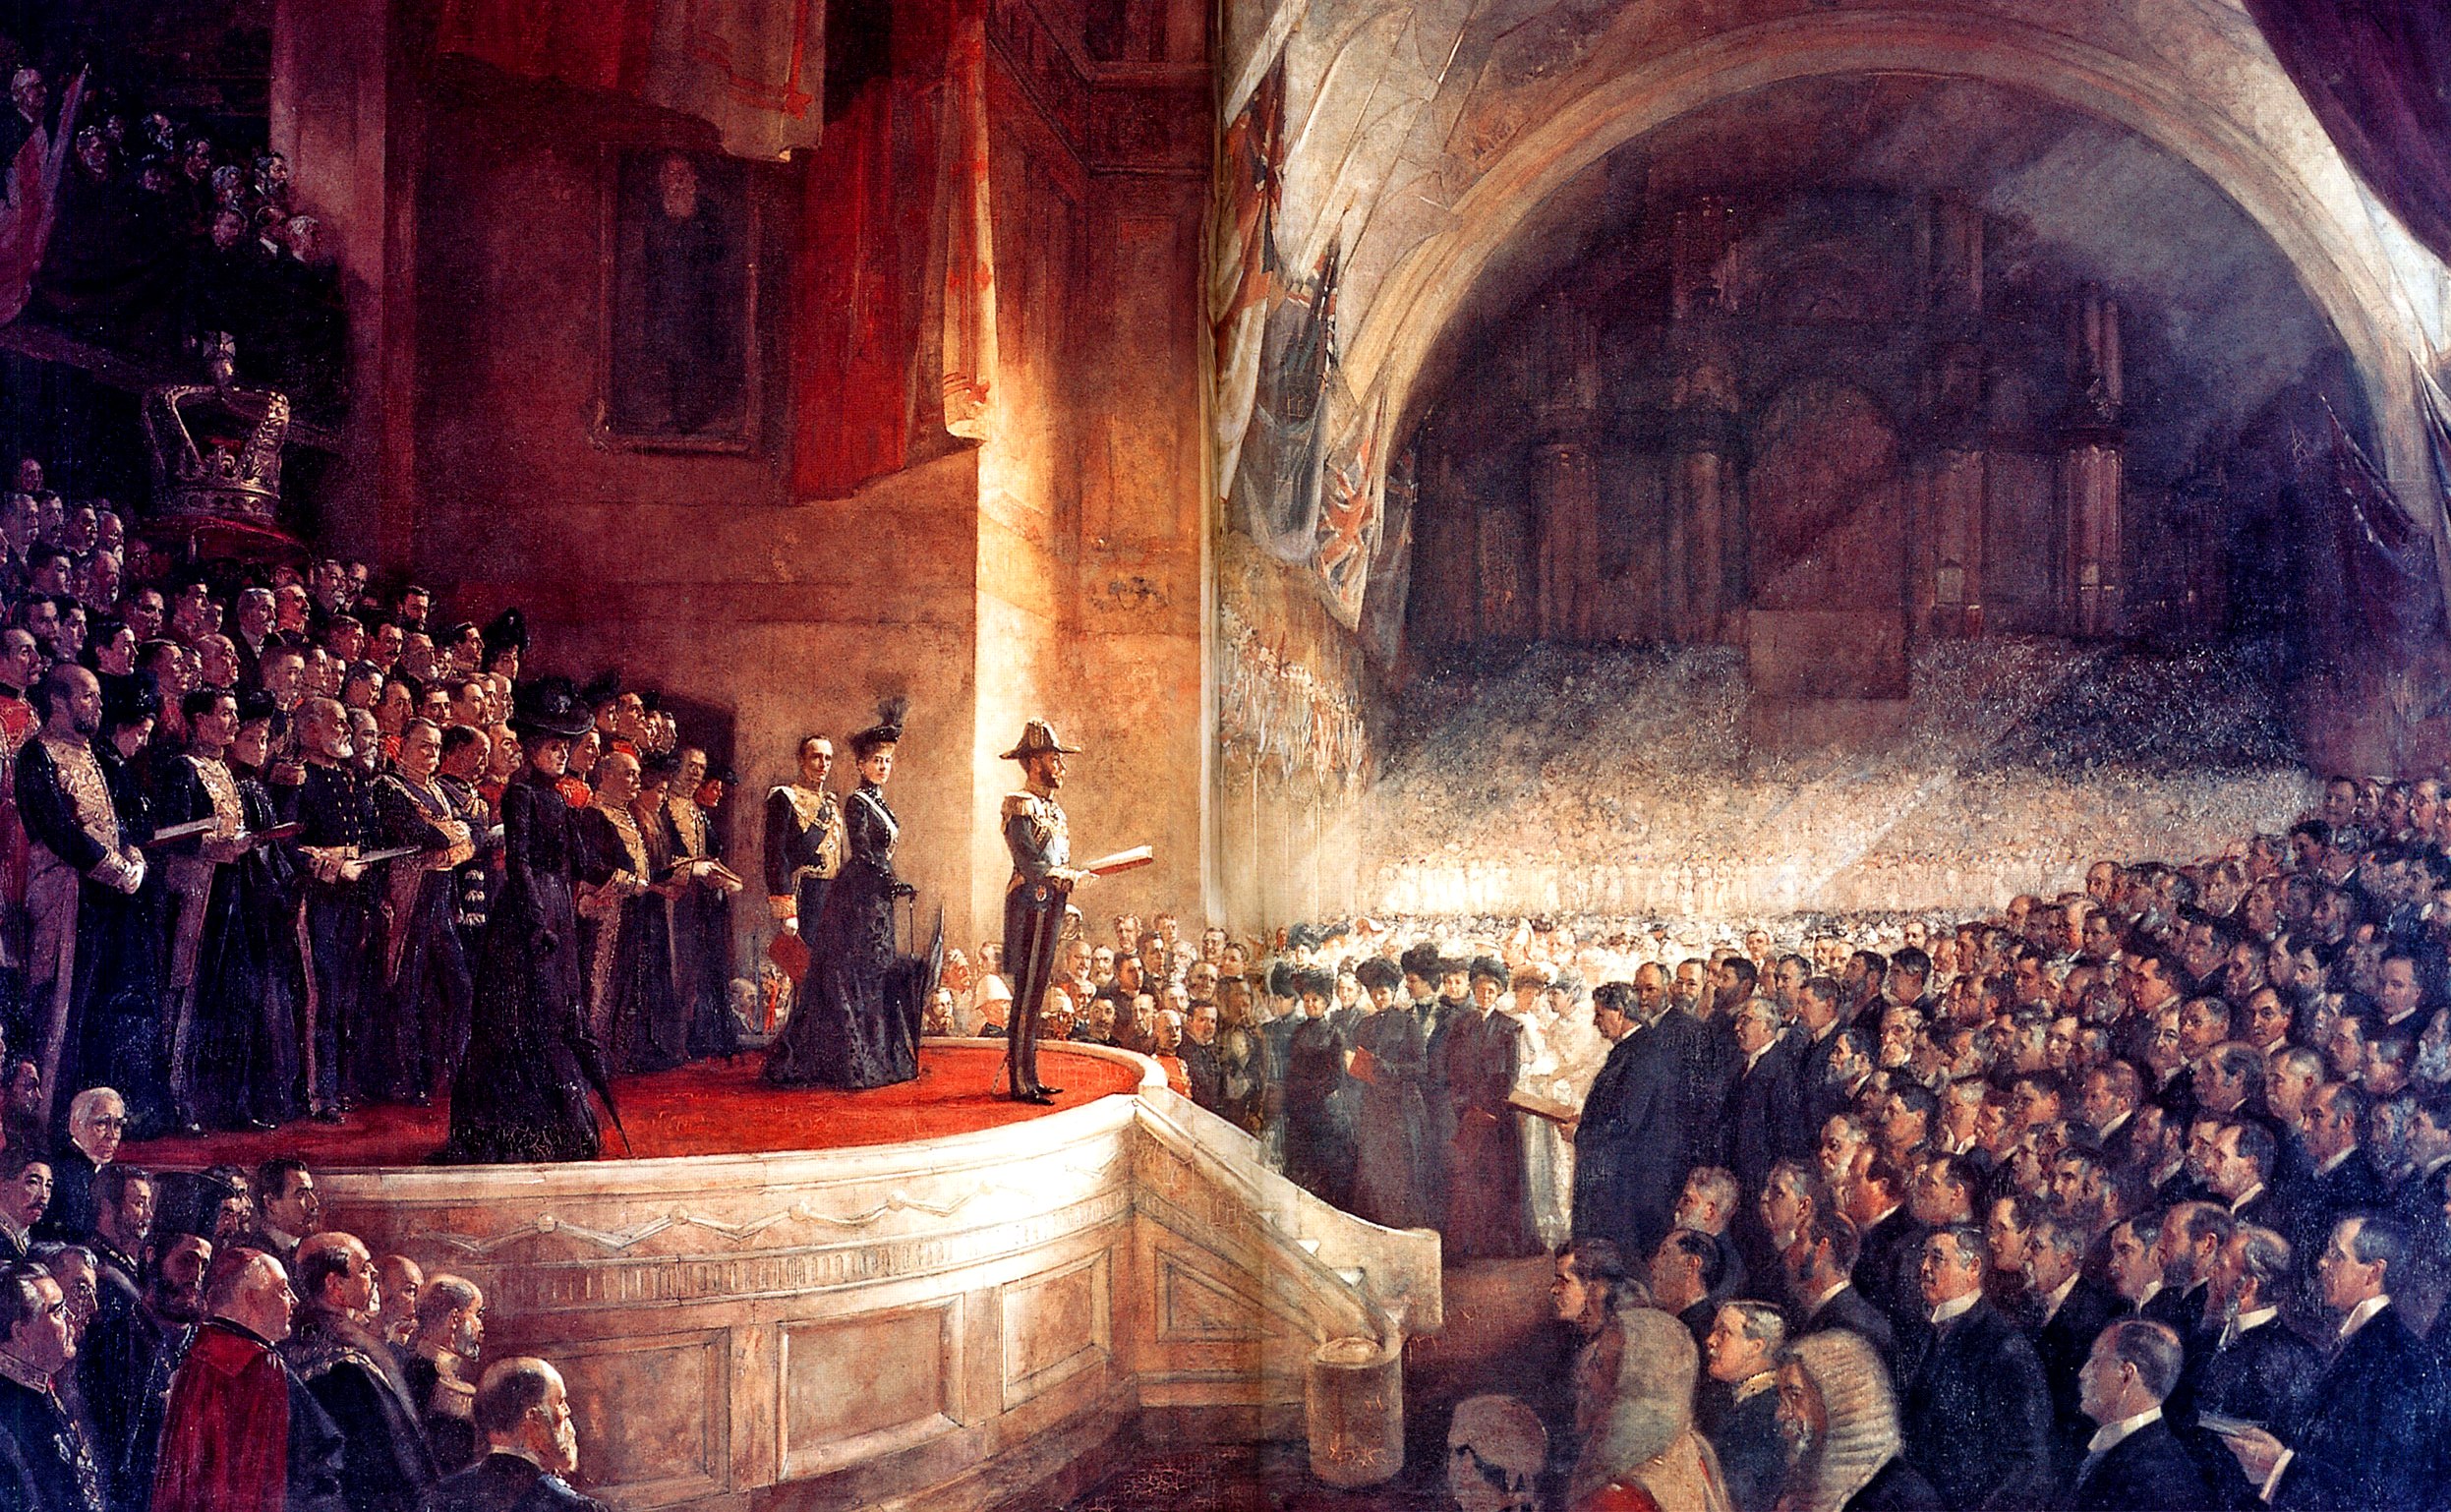 'The Big Picture' oil painting on canvas by Tom Roberts, featuring the opening of Parliament Australia on 9 May 1901 in Melbourne by Prince George Duke of Cornwall & York , later known as King George V, at the Royal Exhibition Building, Melbourne